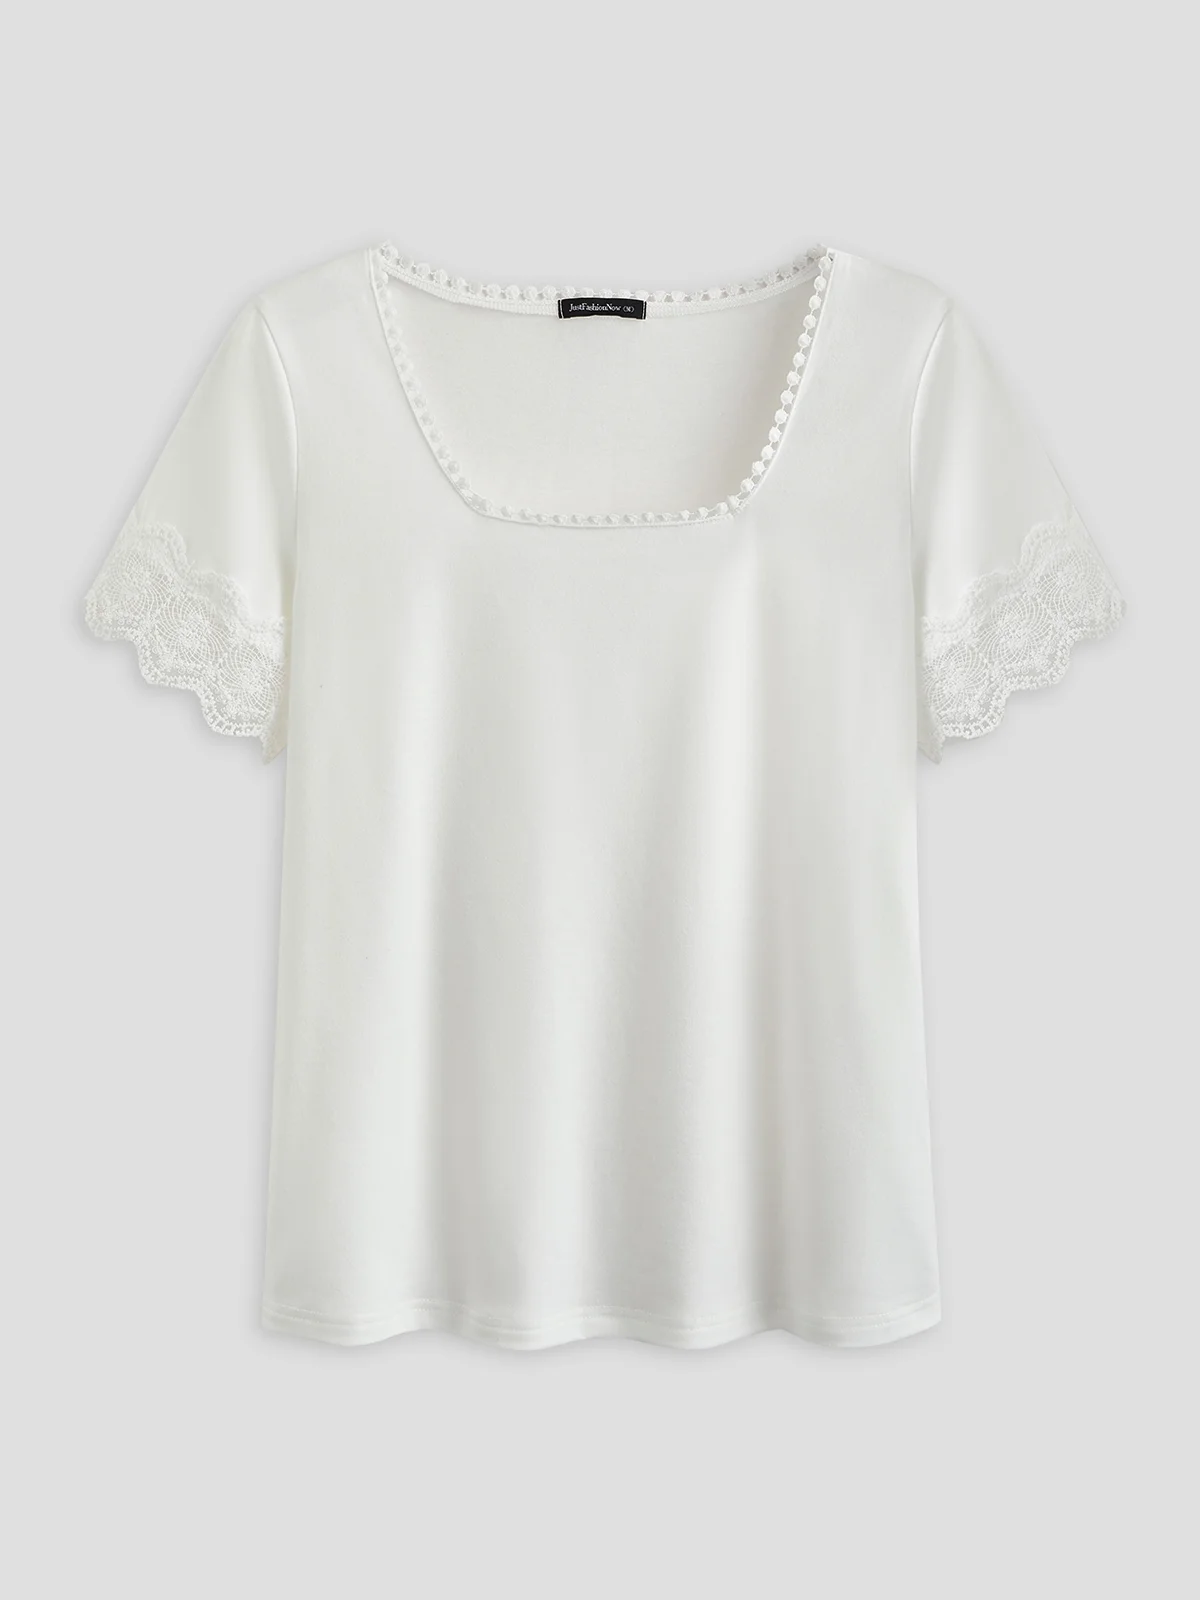 JFN Square Neck Solid Lace Basic T-Shirt/Tee